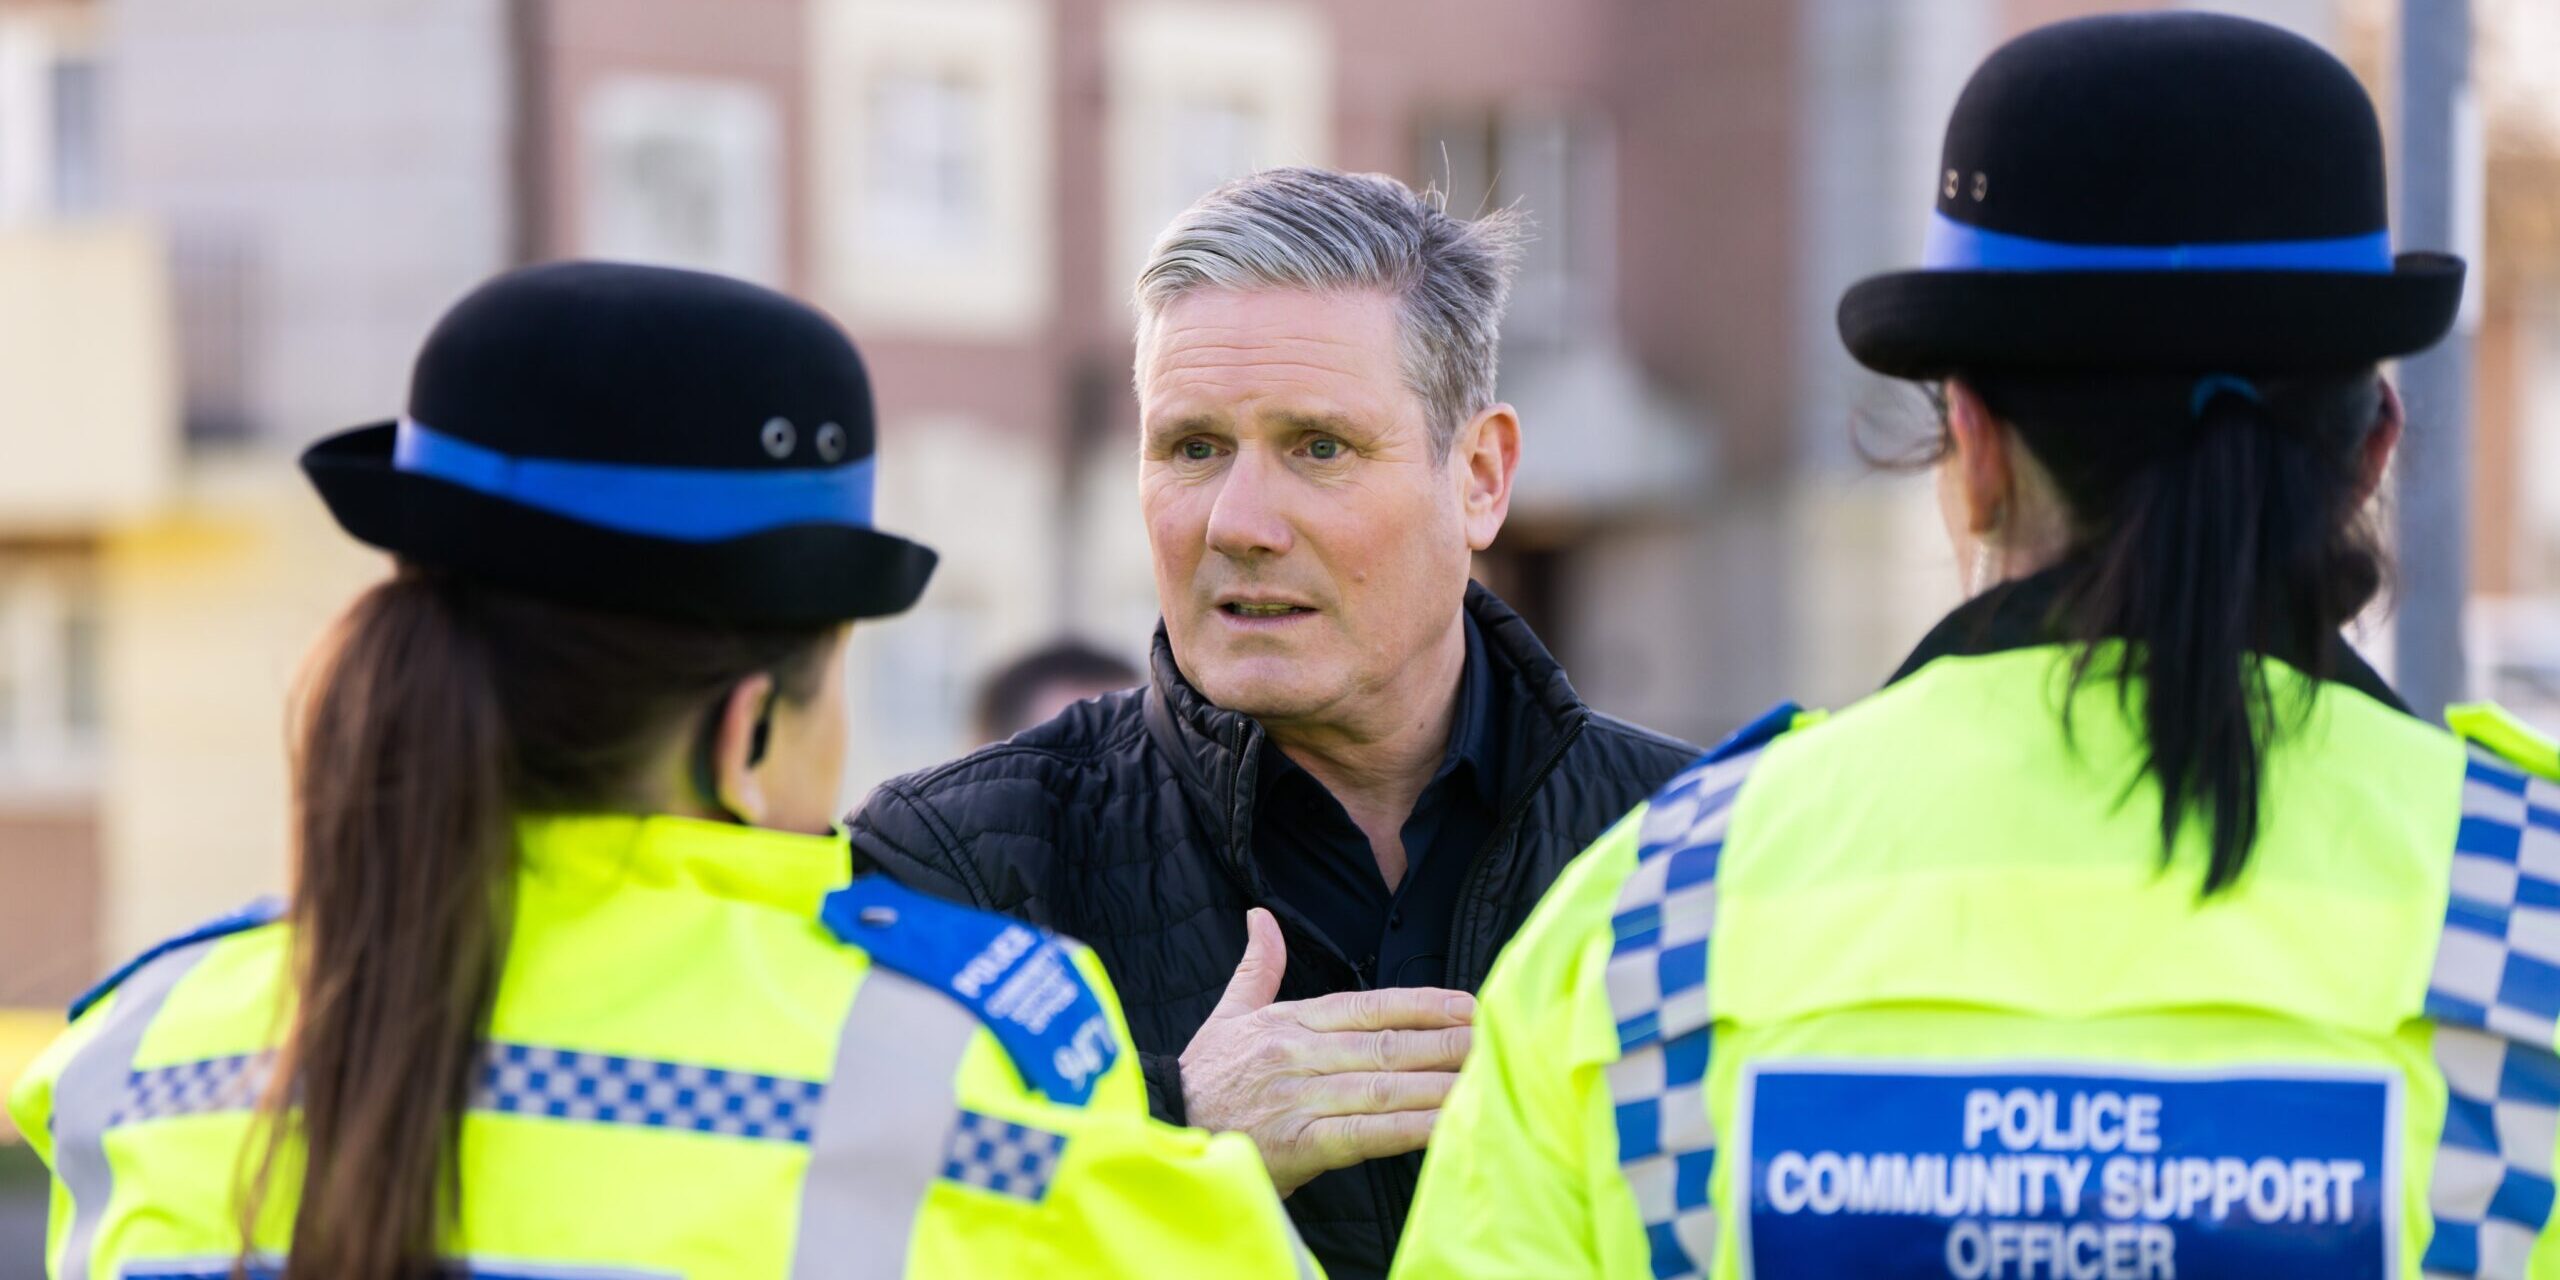 Keir Starmer talking to two Police Community Support Officers.